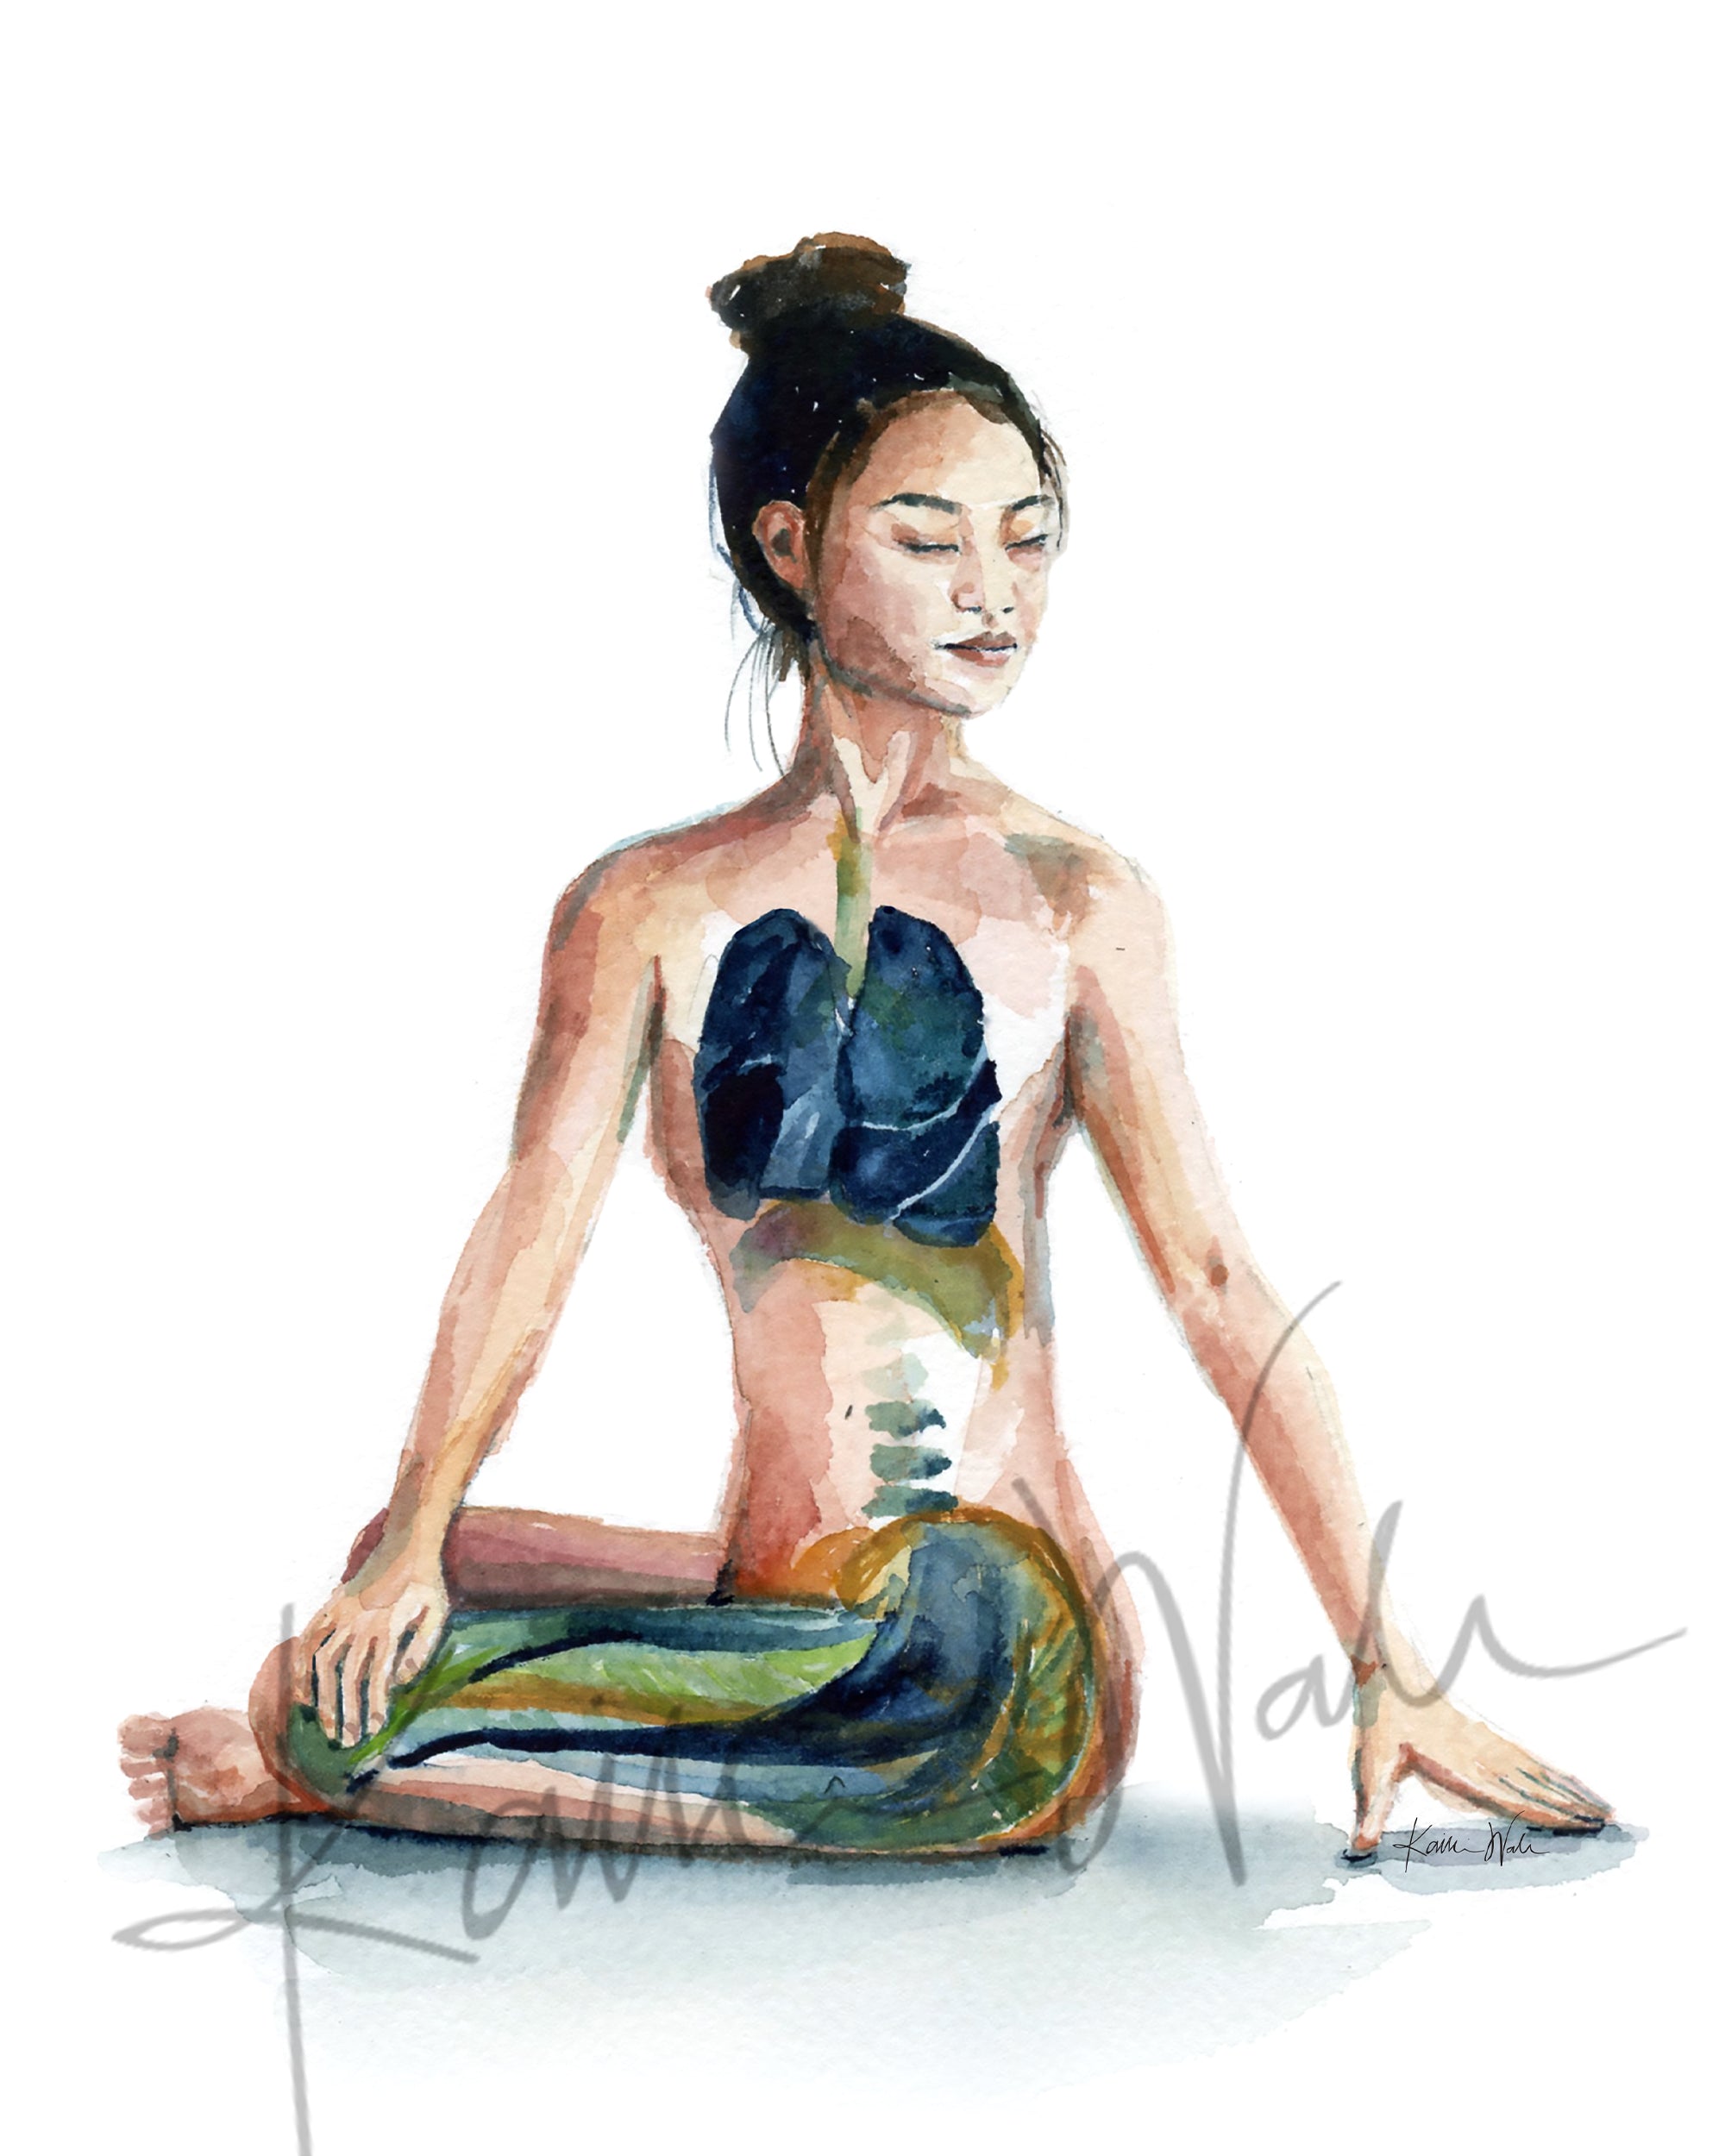 Unframed watercolor painting of a woman with her eyes closed in a seated yoga pose.